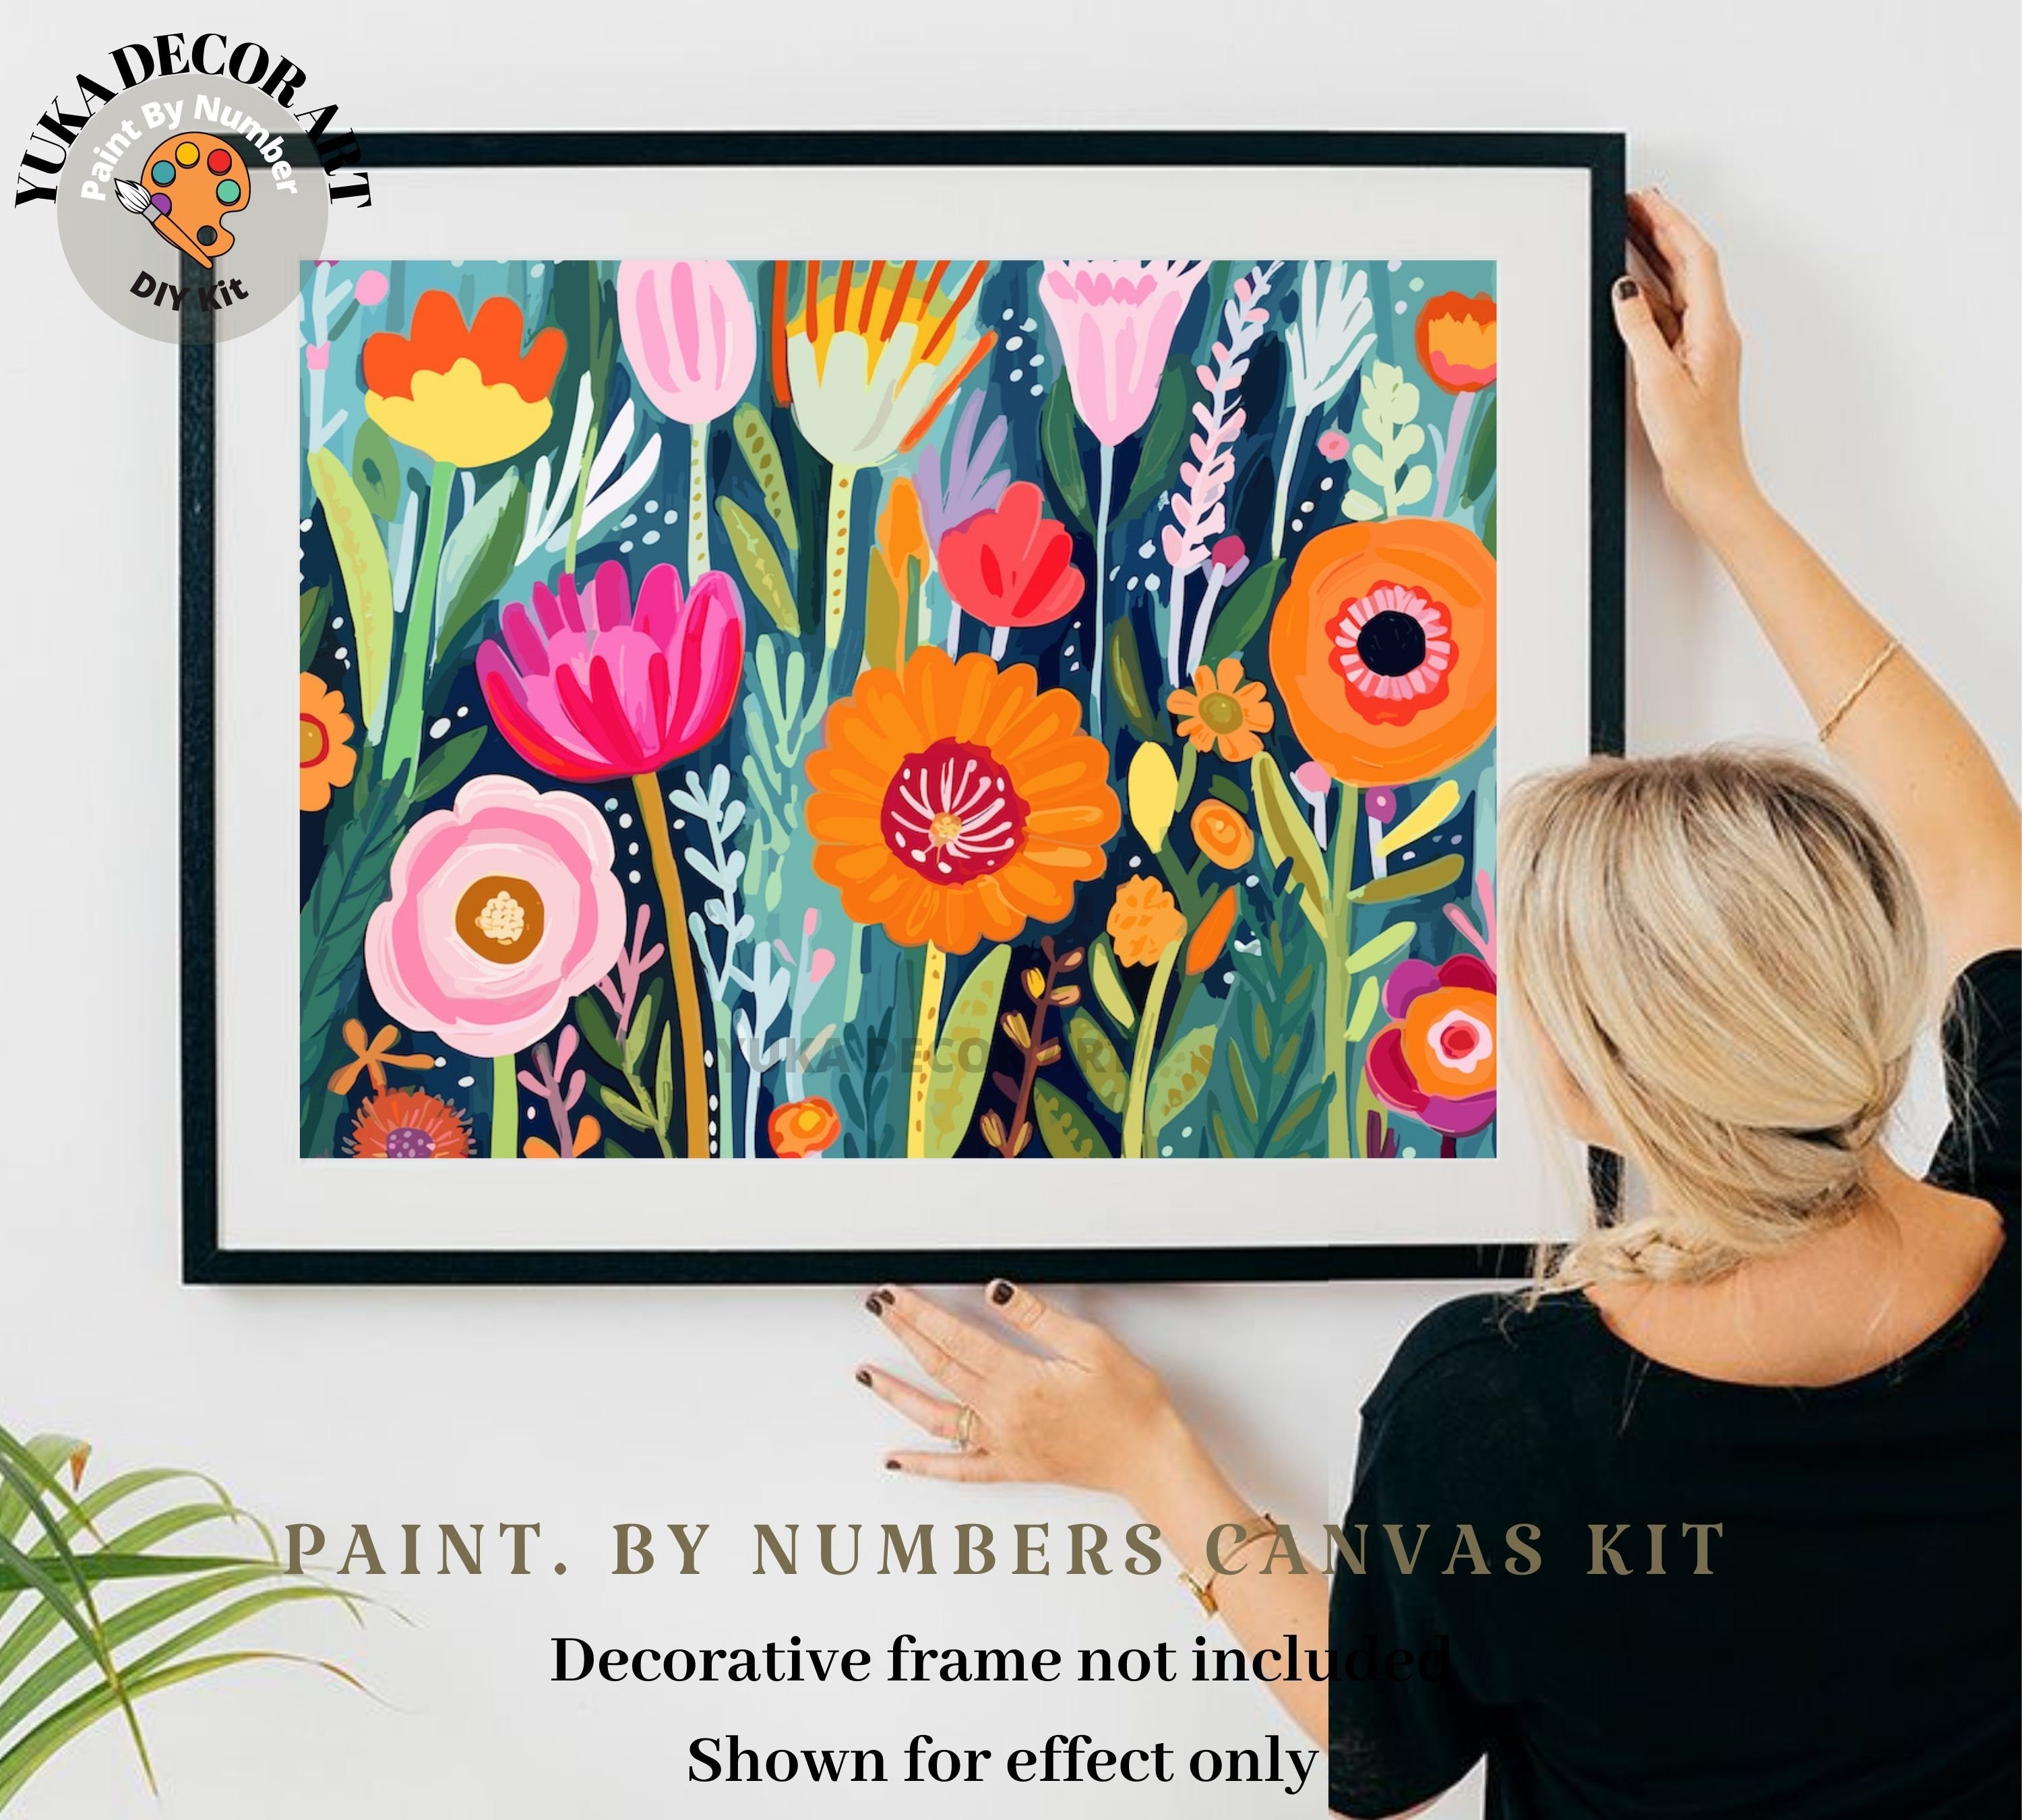 TSVETNOY Paint by Numbers for Adults Kit on Framed Canvas - Fashion Woman Head with Flowers - DIY Abstract Acrylic Painting W